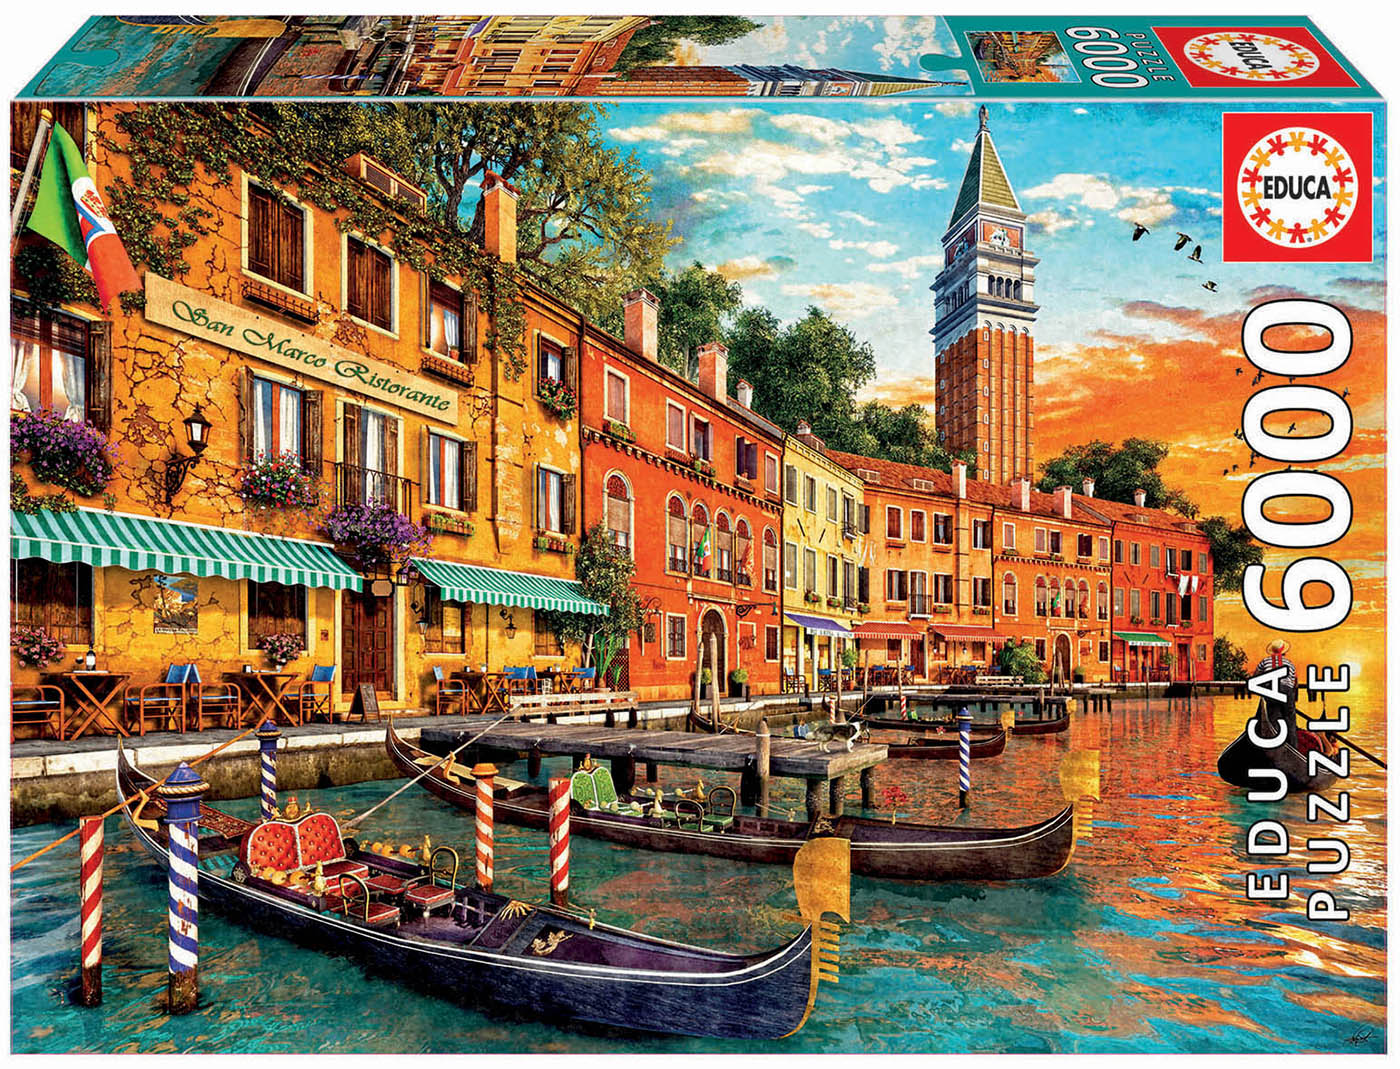 The world, executive map - 4000 pieces from Educa : r/Jigsawpuzzles